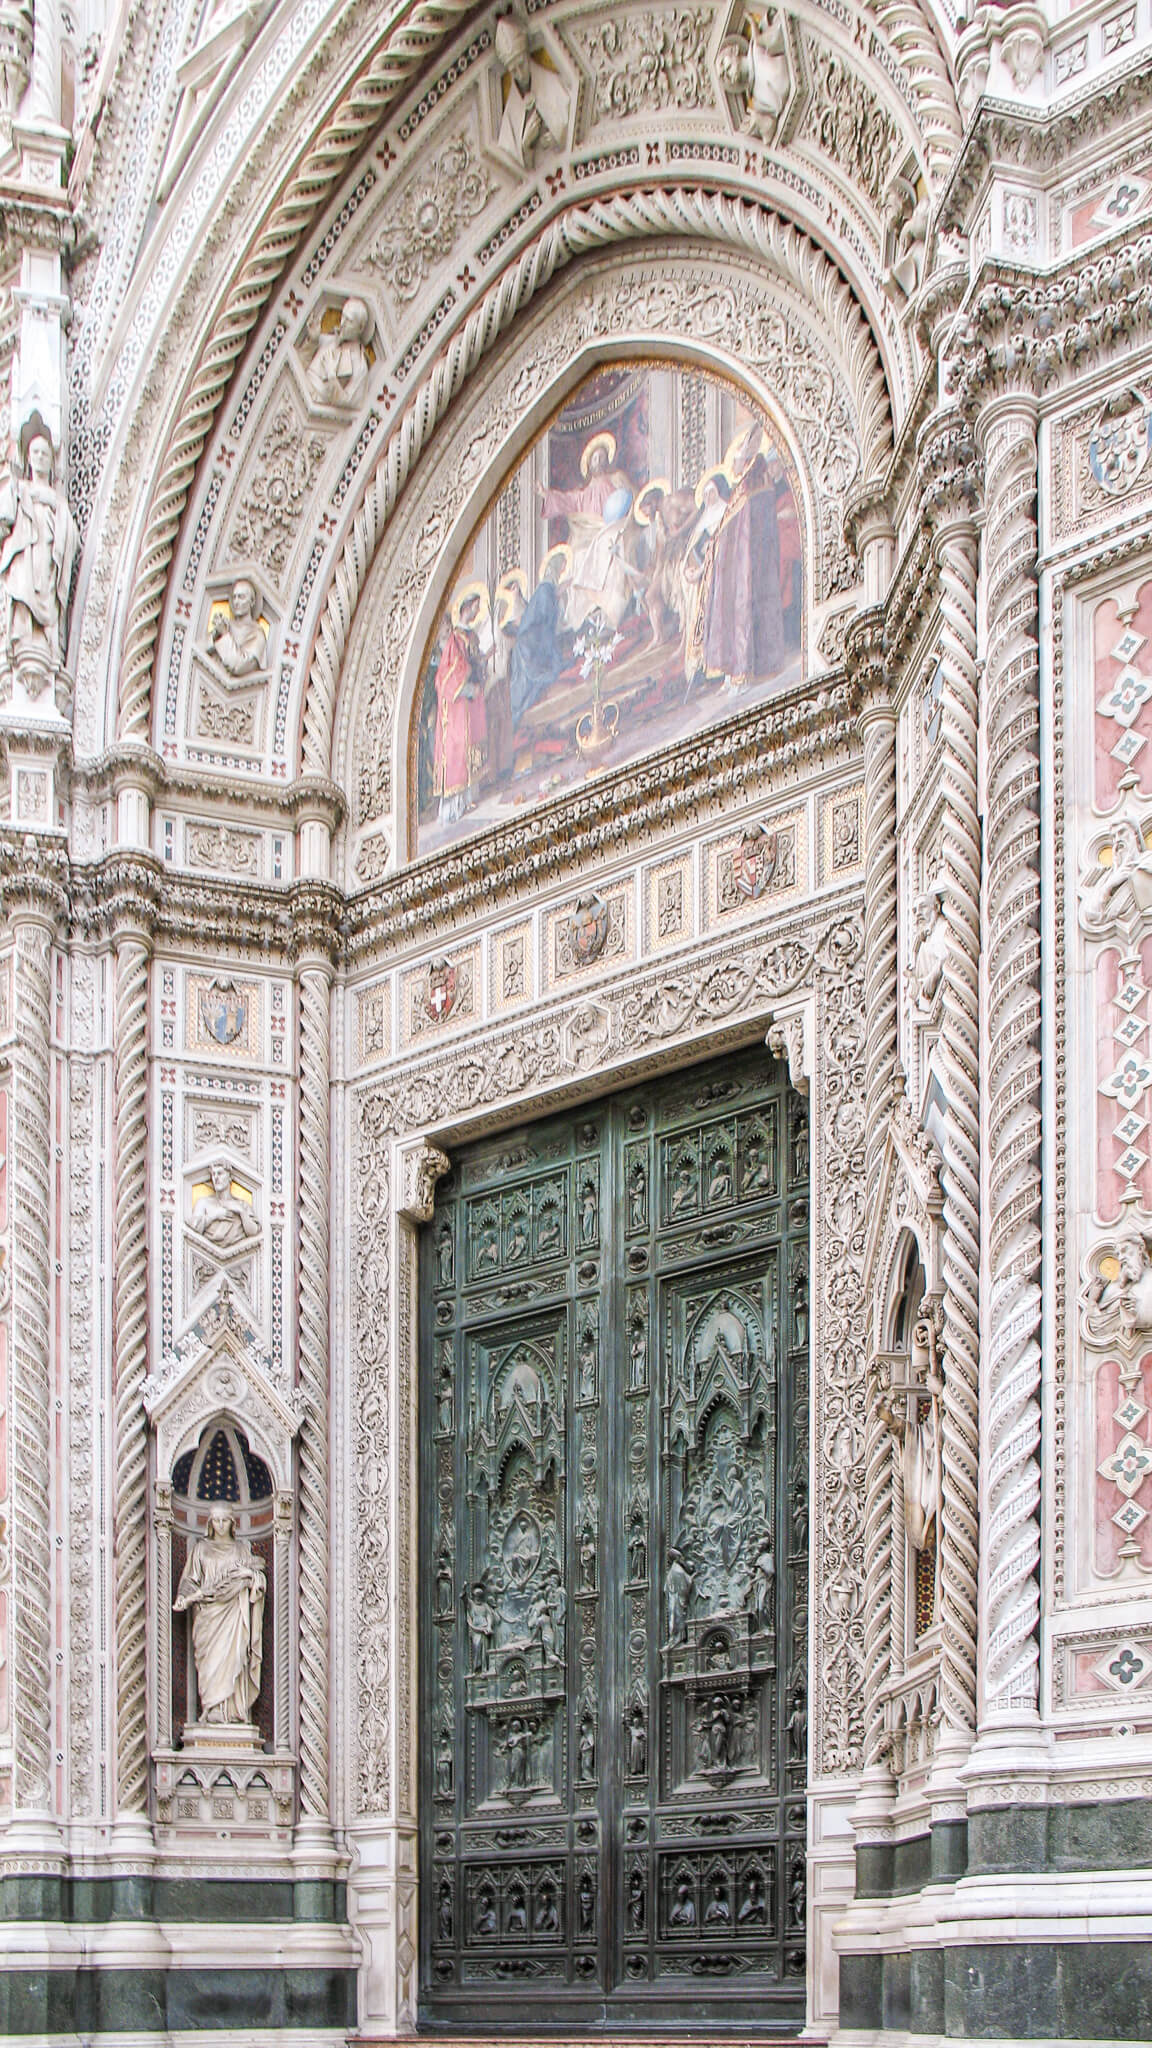 Doors of the Florence Duomo